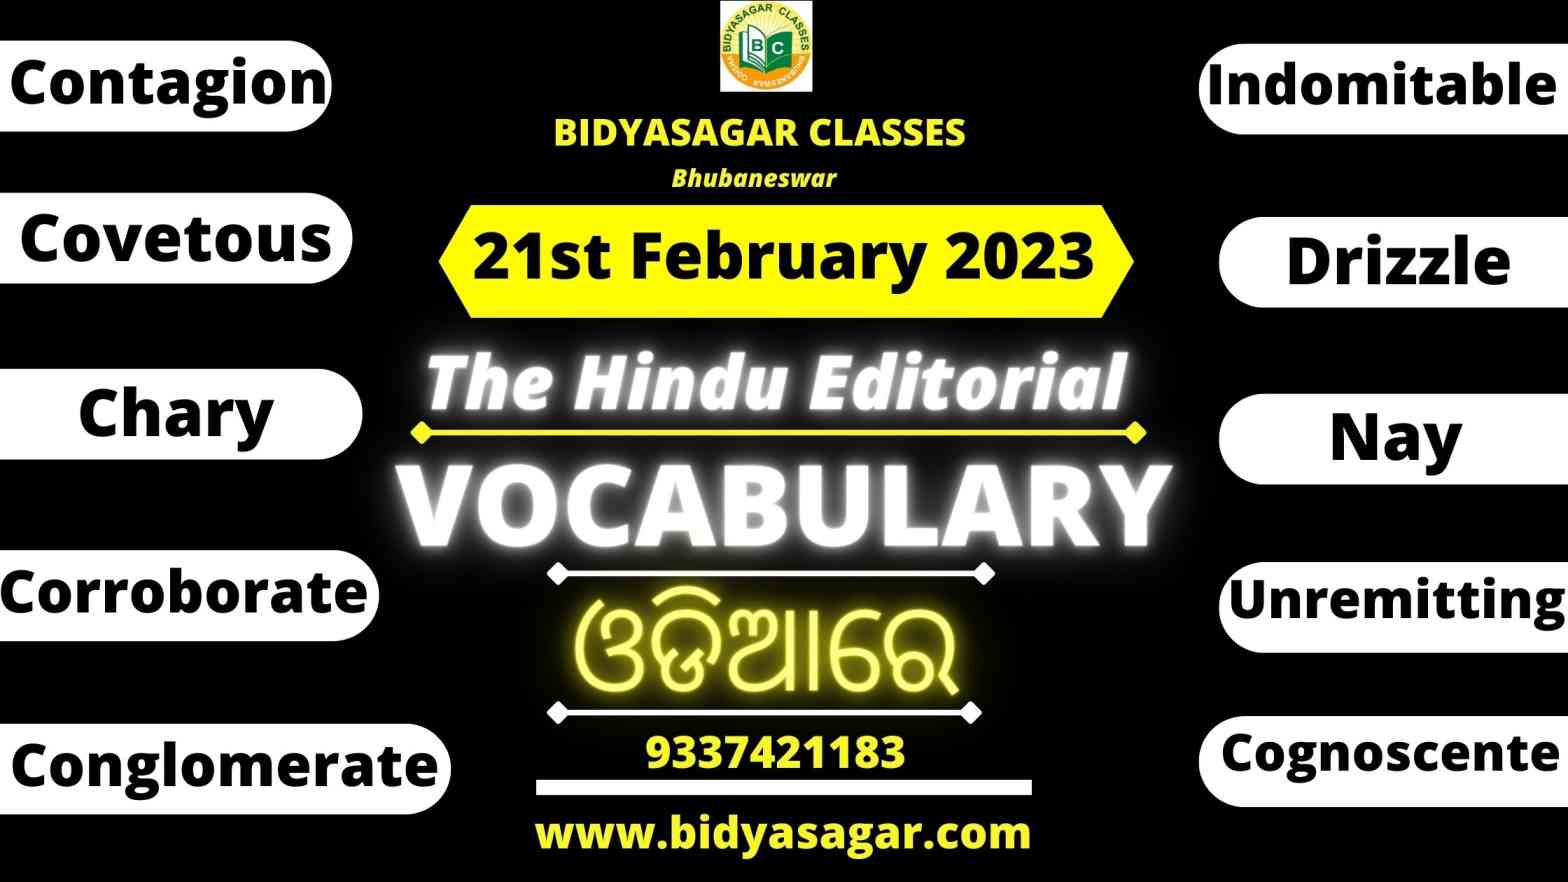 The Hindu Editorial Vocabulary of 21st February 2023